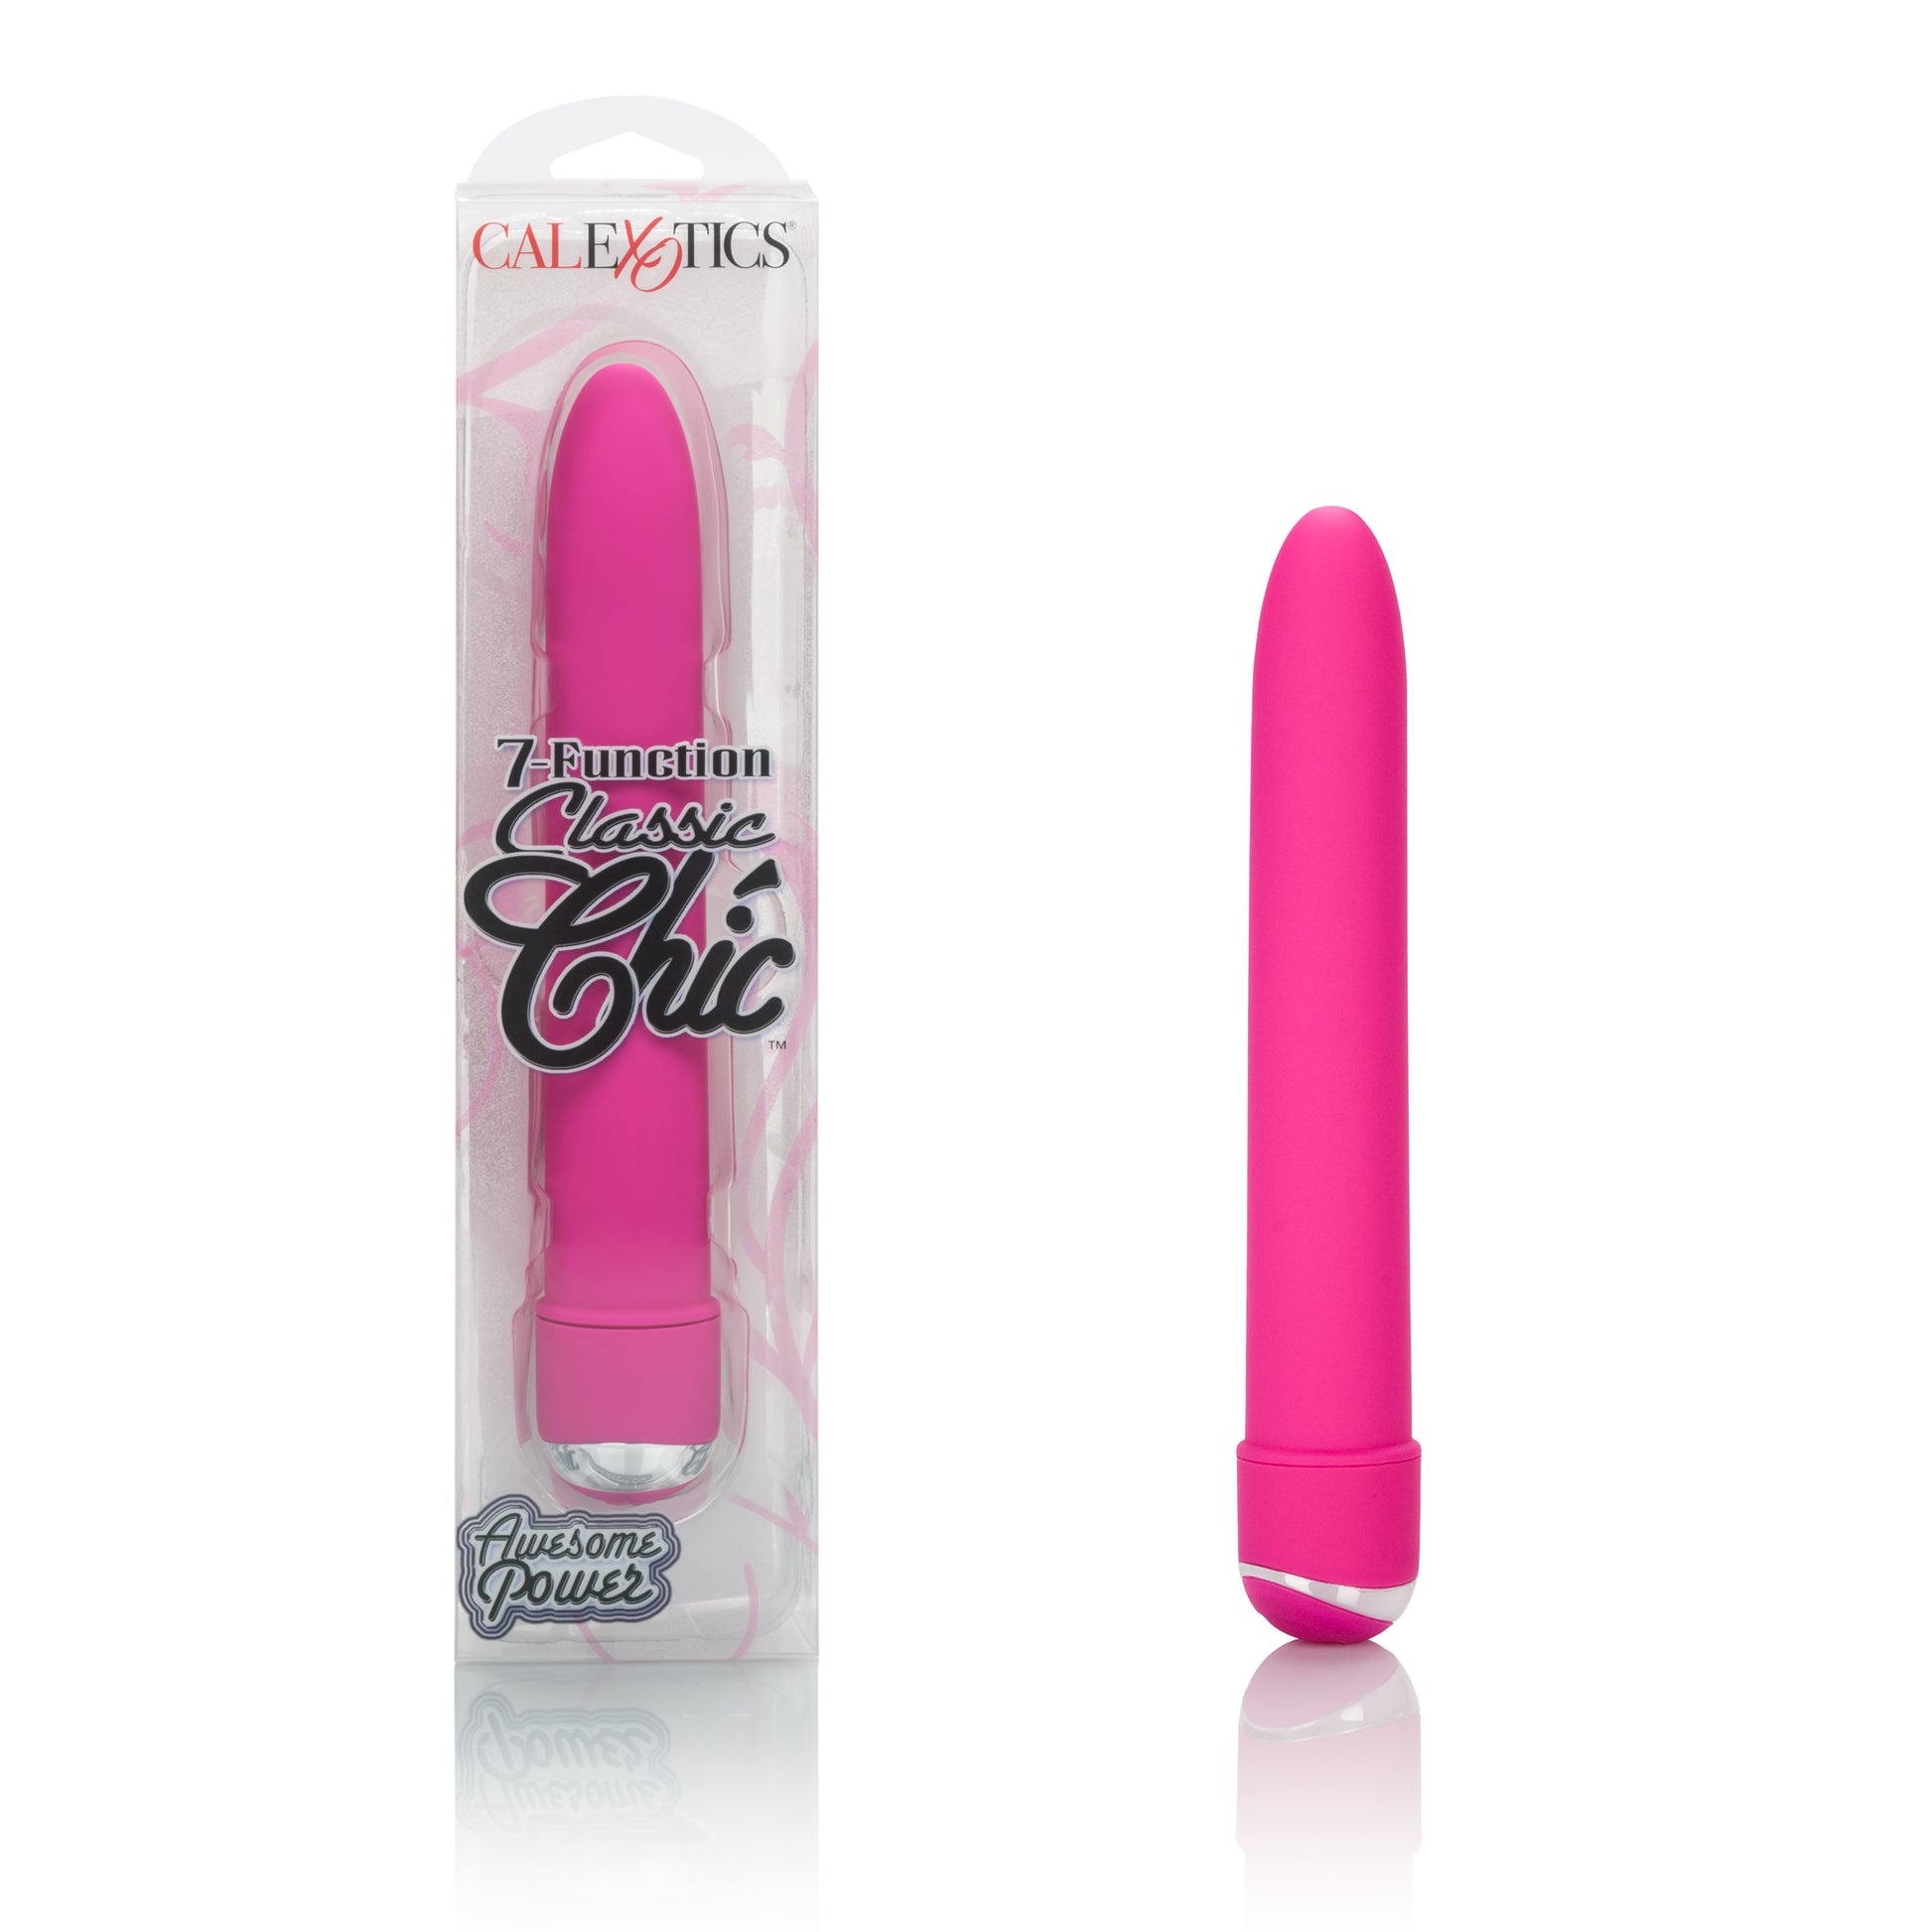 7 Function Classic Chic 6 Inches Vibe - Pink – BOTTUMZ UP